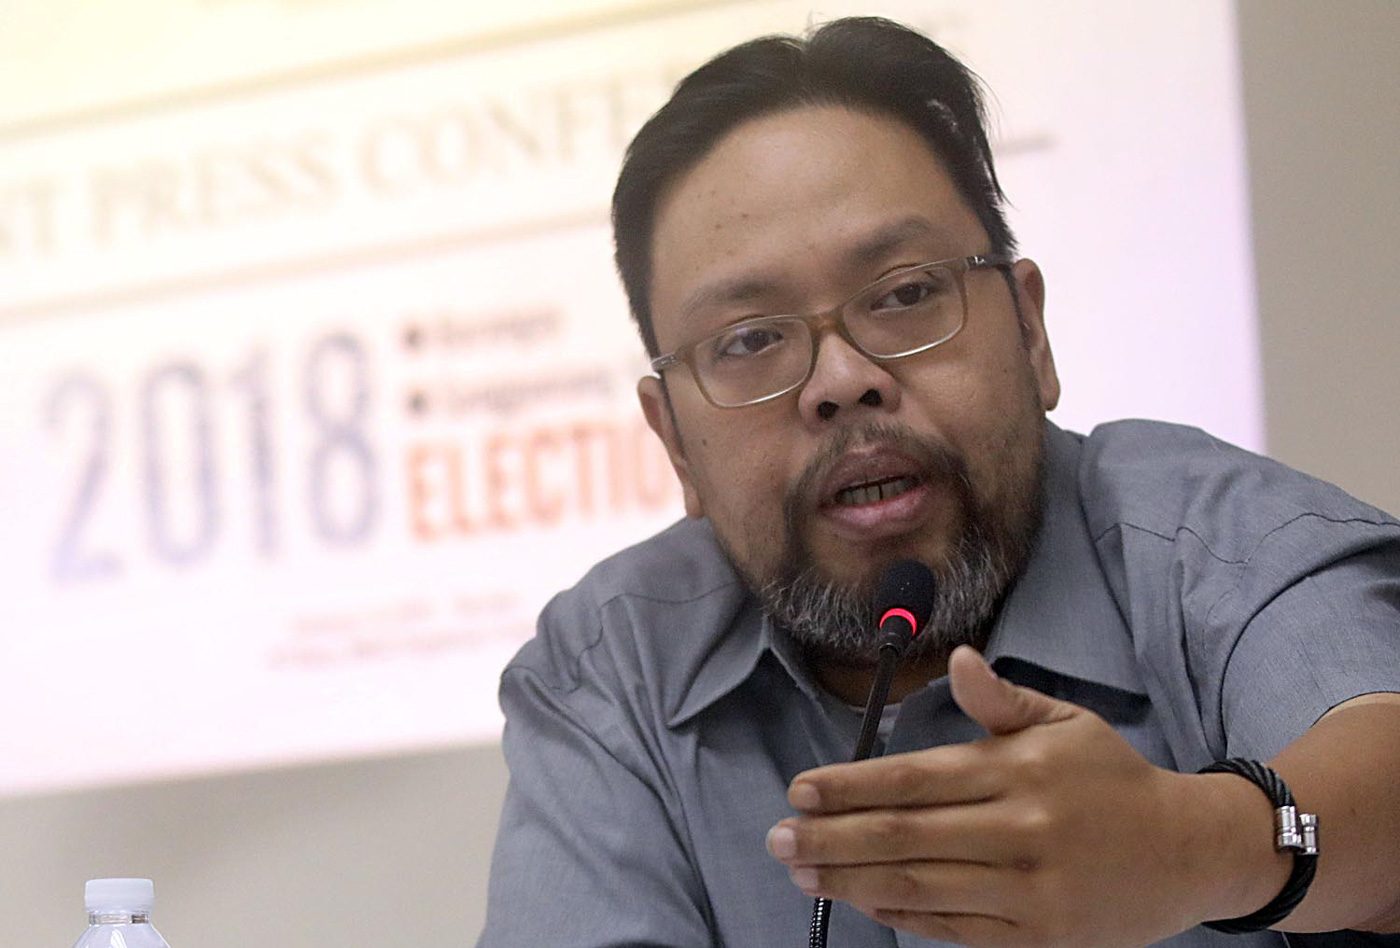 Comelec: You want change? Register to vote